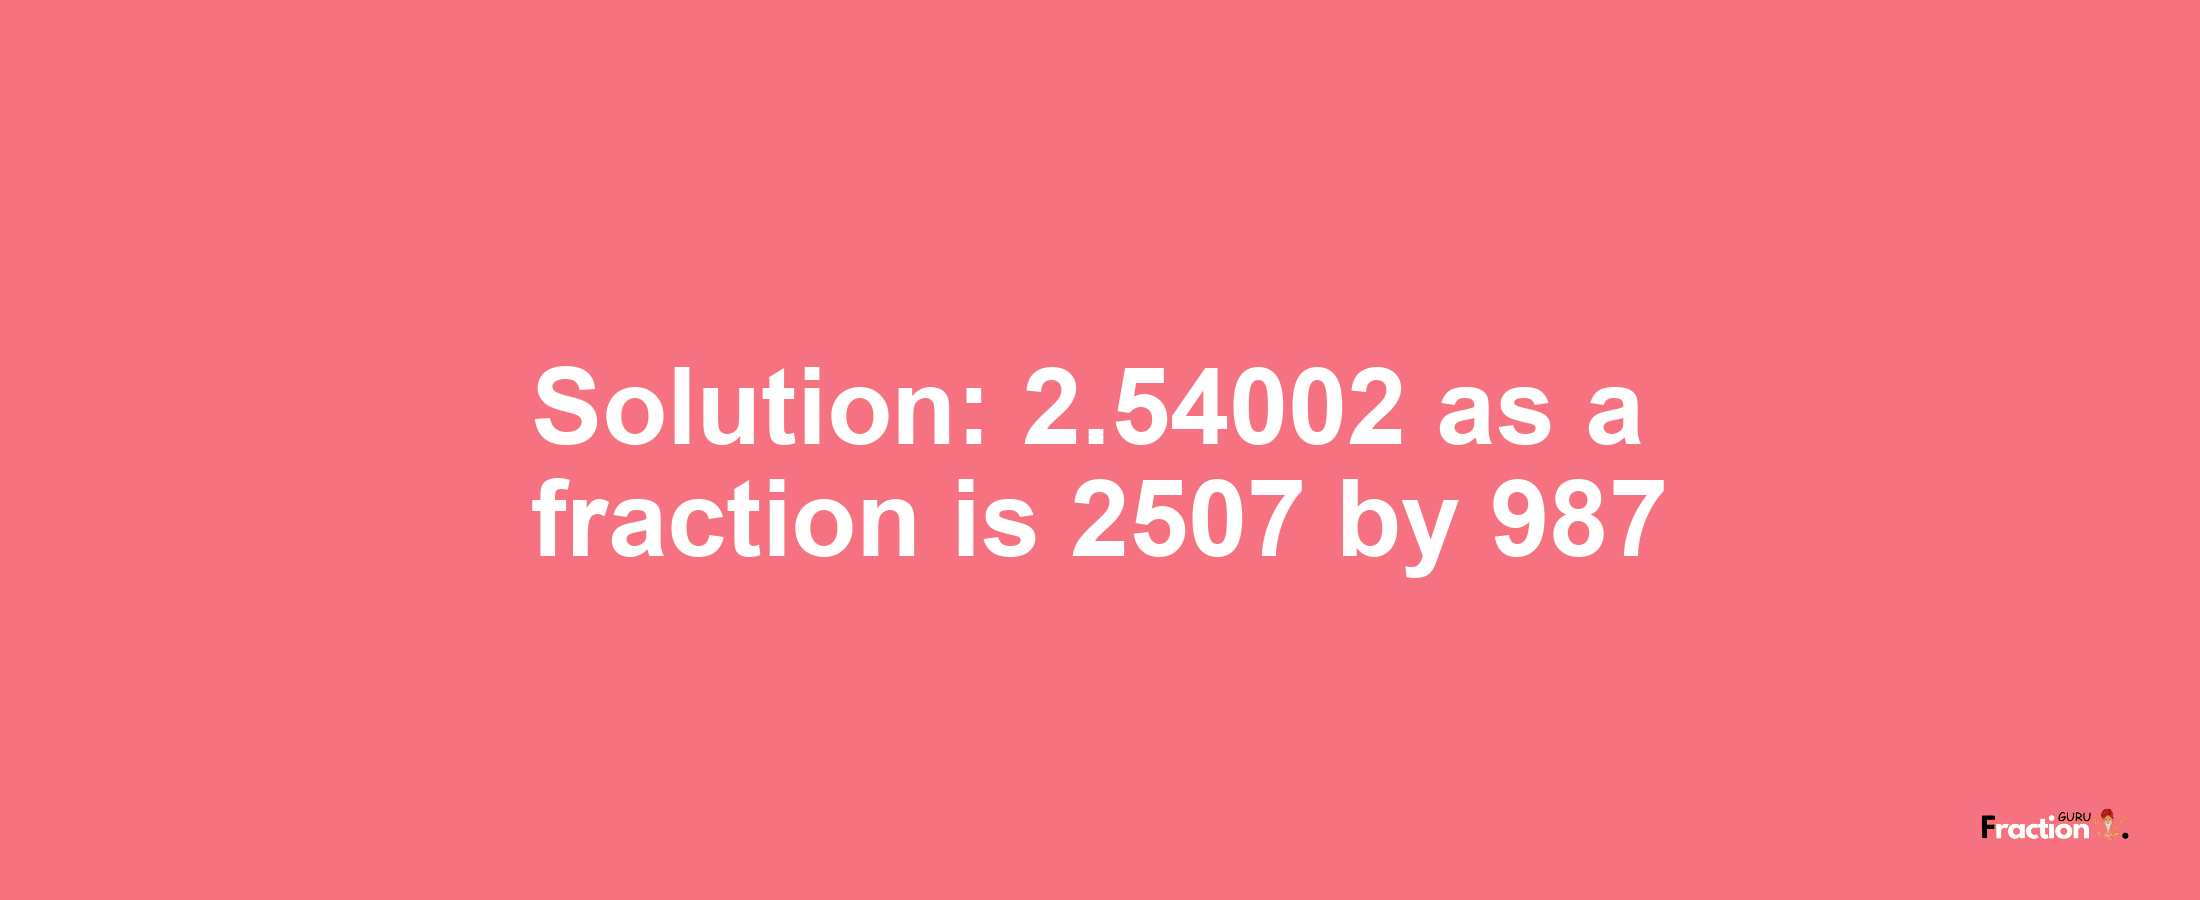 Solution:2.54002 as a fraction is 2507/987